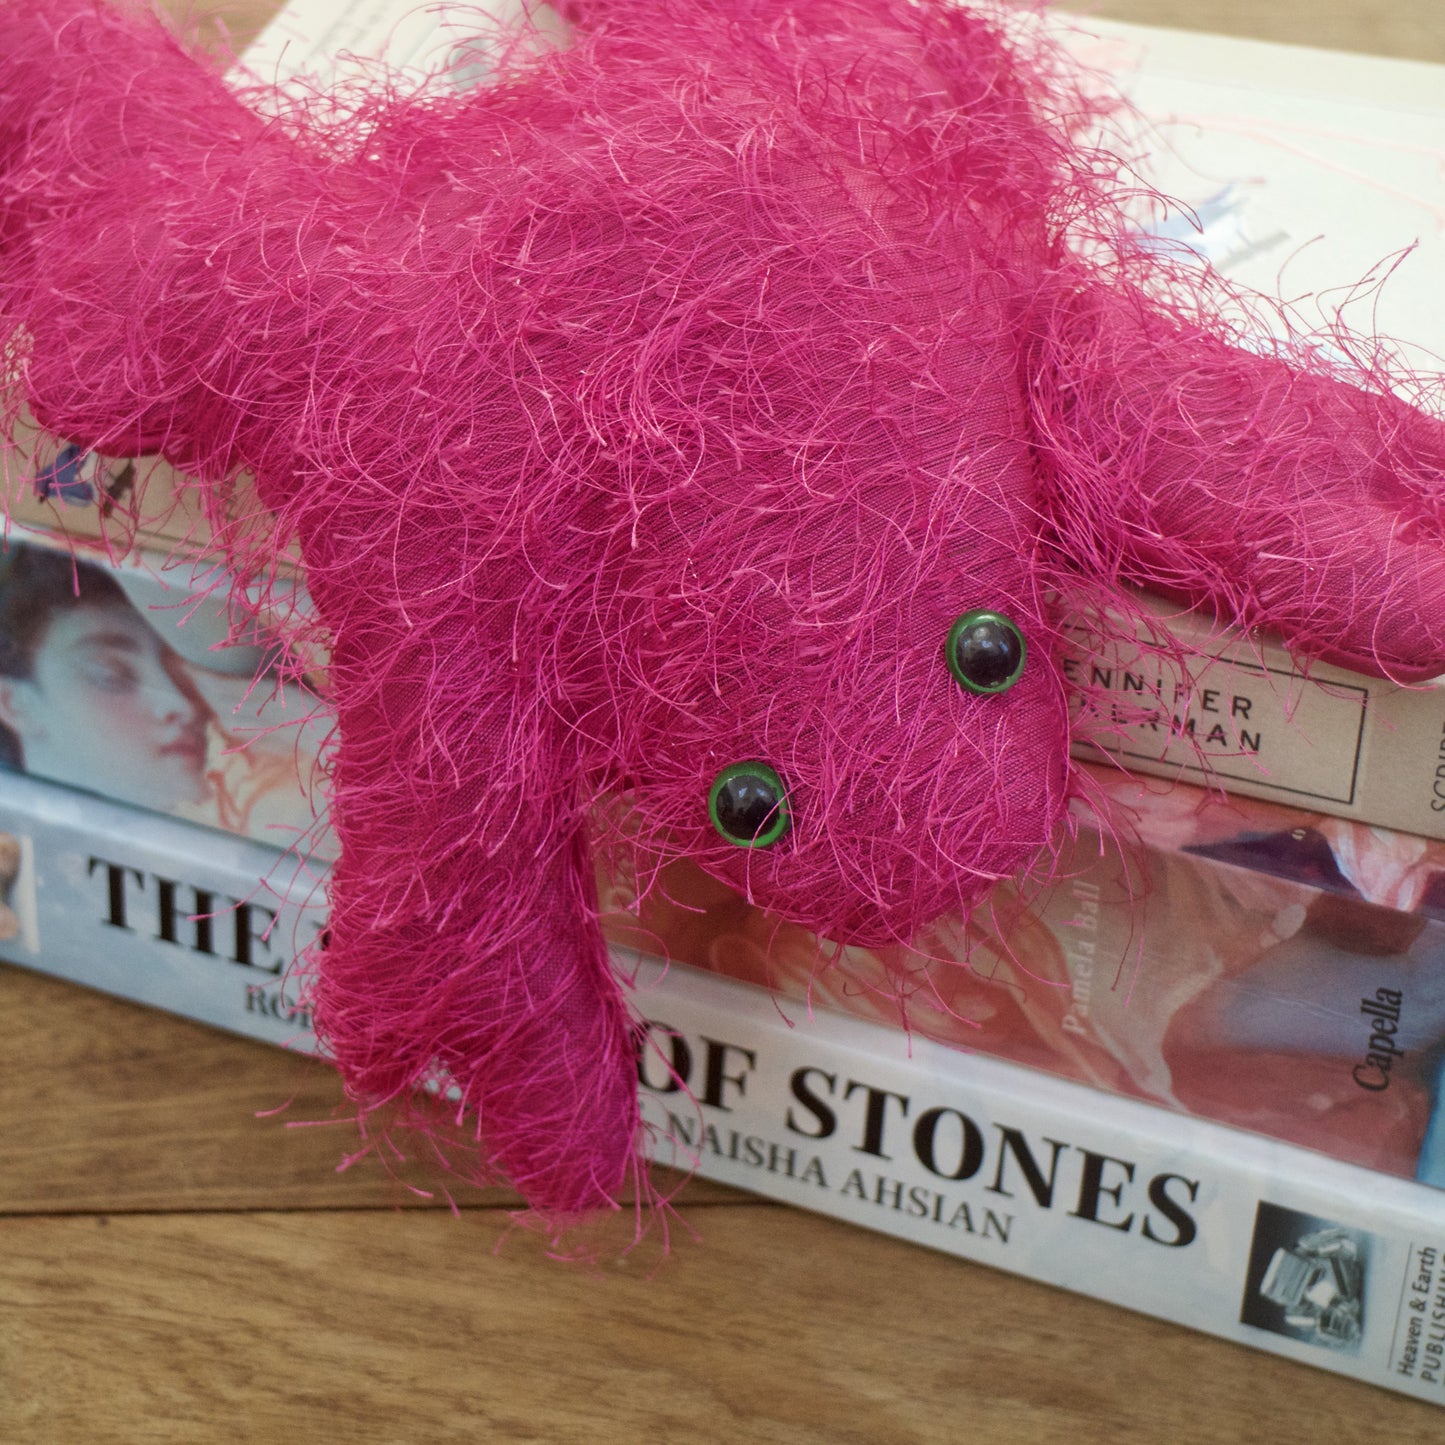 pink fluffy stuffed frog lying on a stack of books